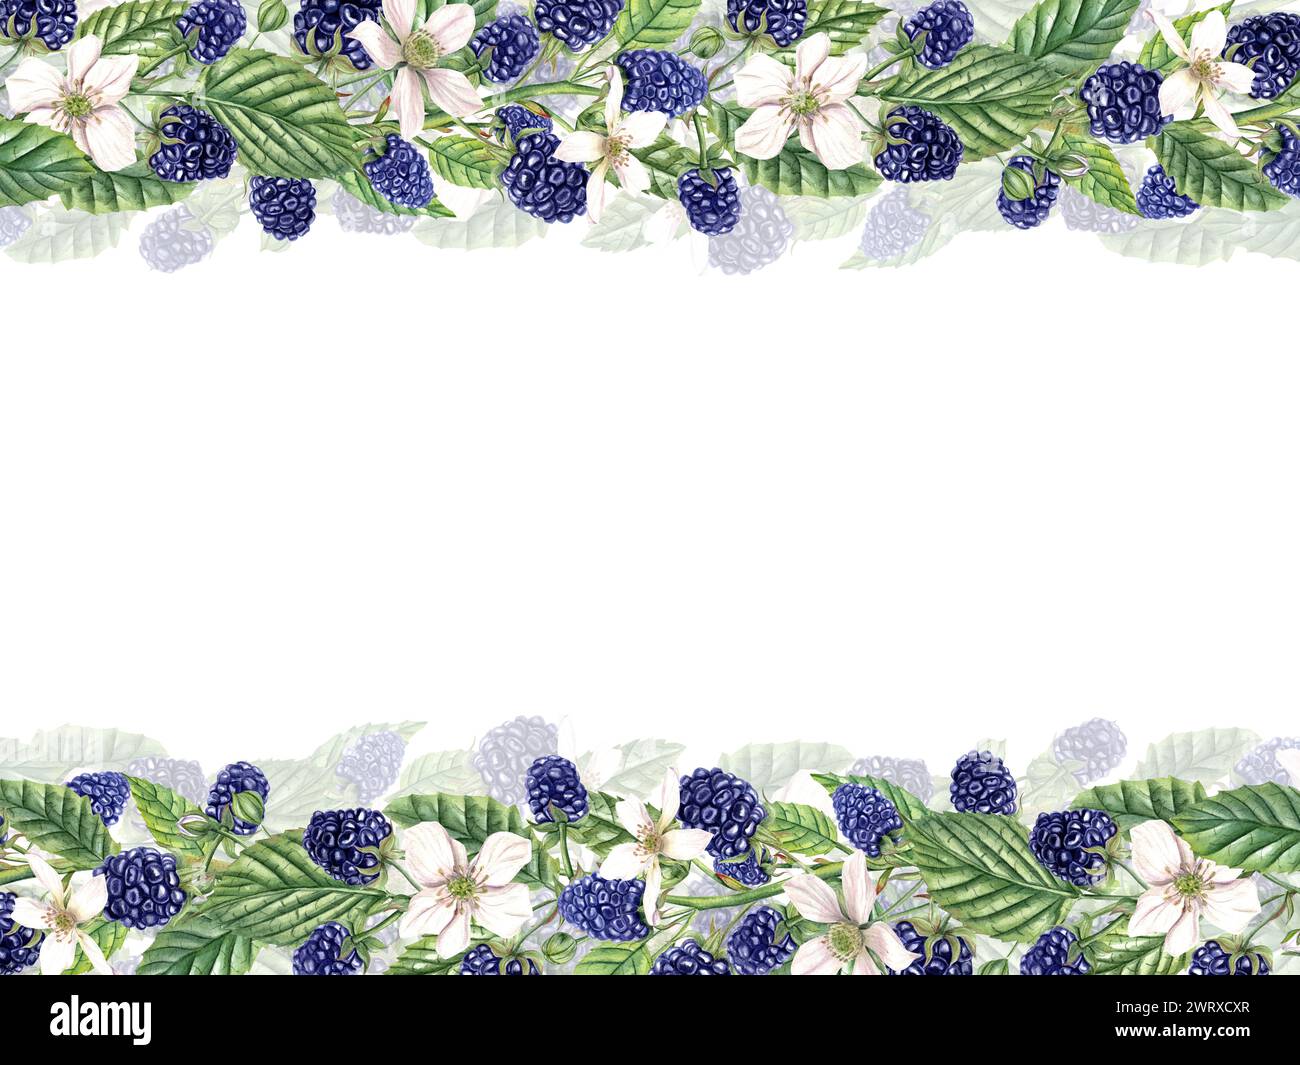 Wild berries. Bunches of blackberries. White flowers, ripe berries, leaves. Forest and garden berries. Horizontal frame with copy space for text. Stock Photo